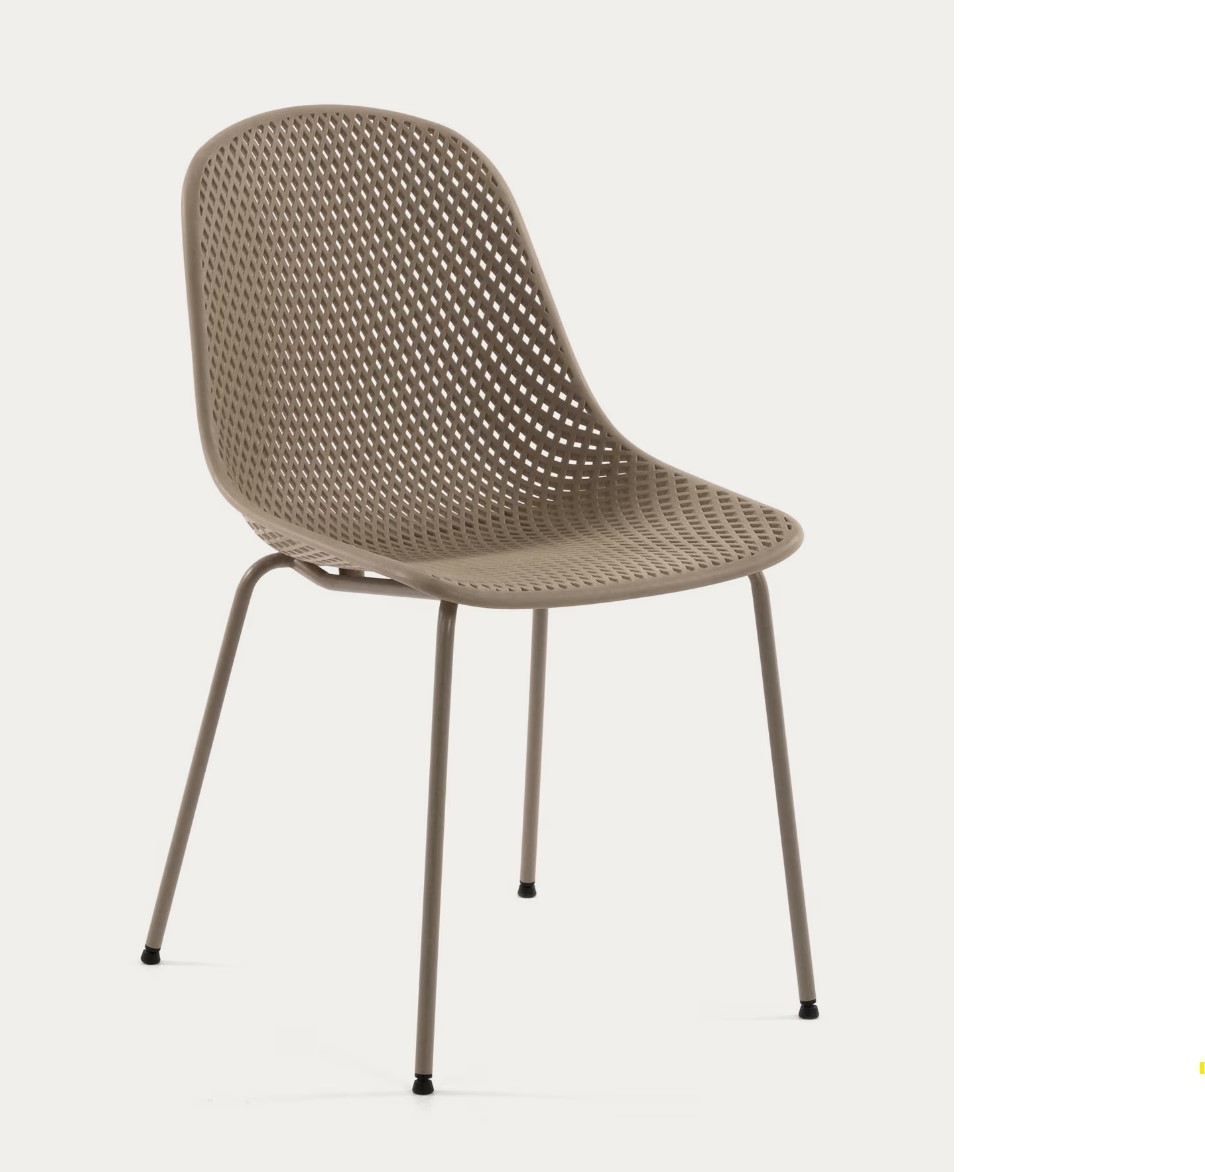 Outdoor Chair Quinby Beige W450 x D400 x H820mm